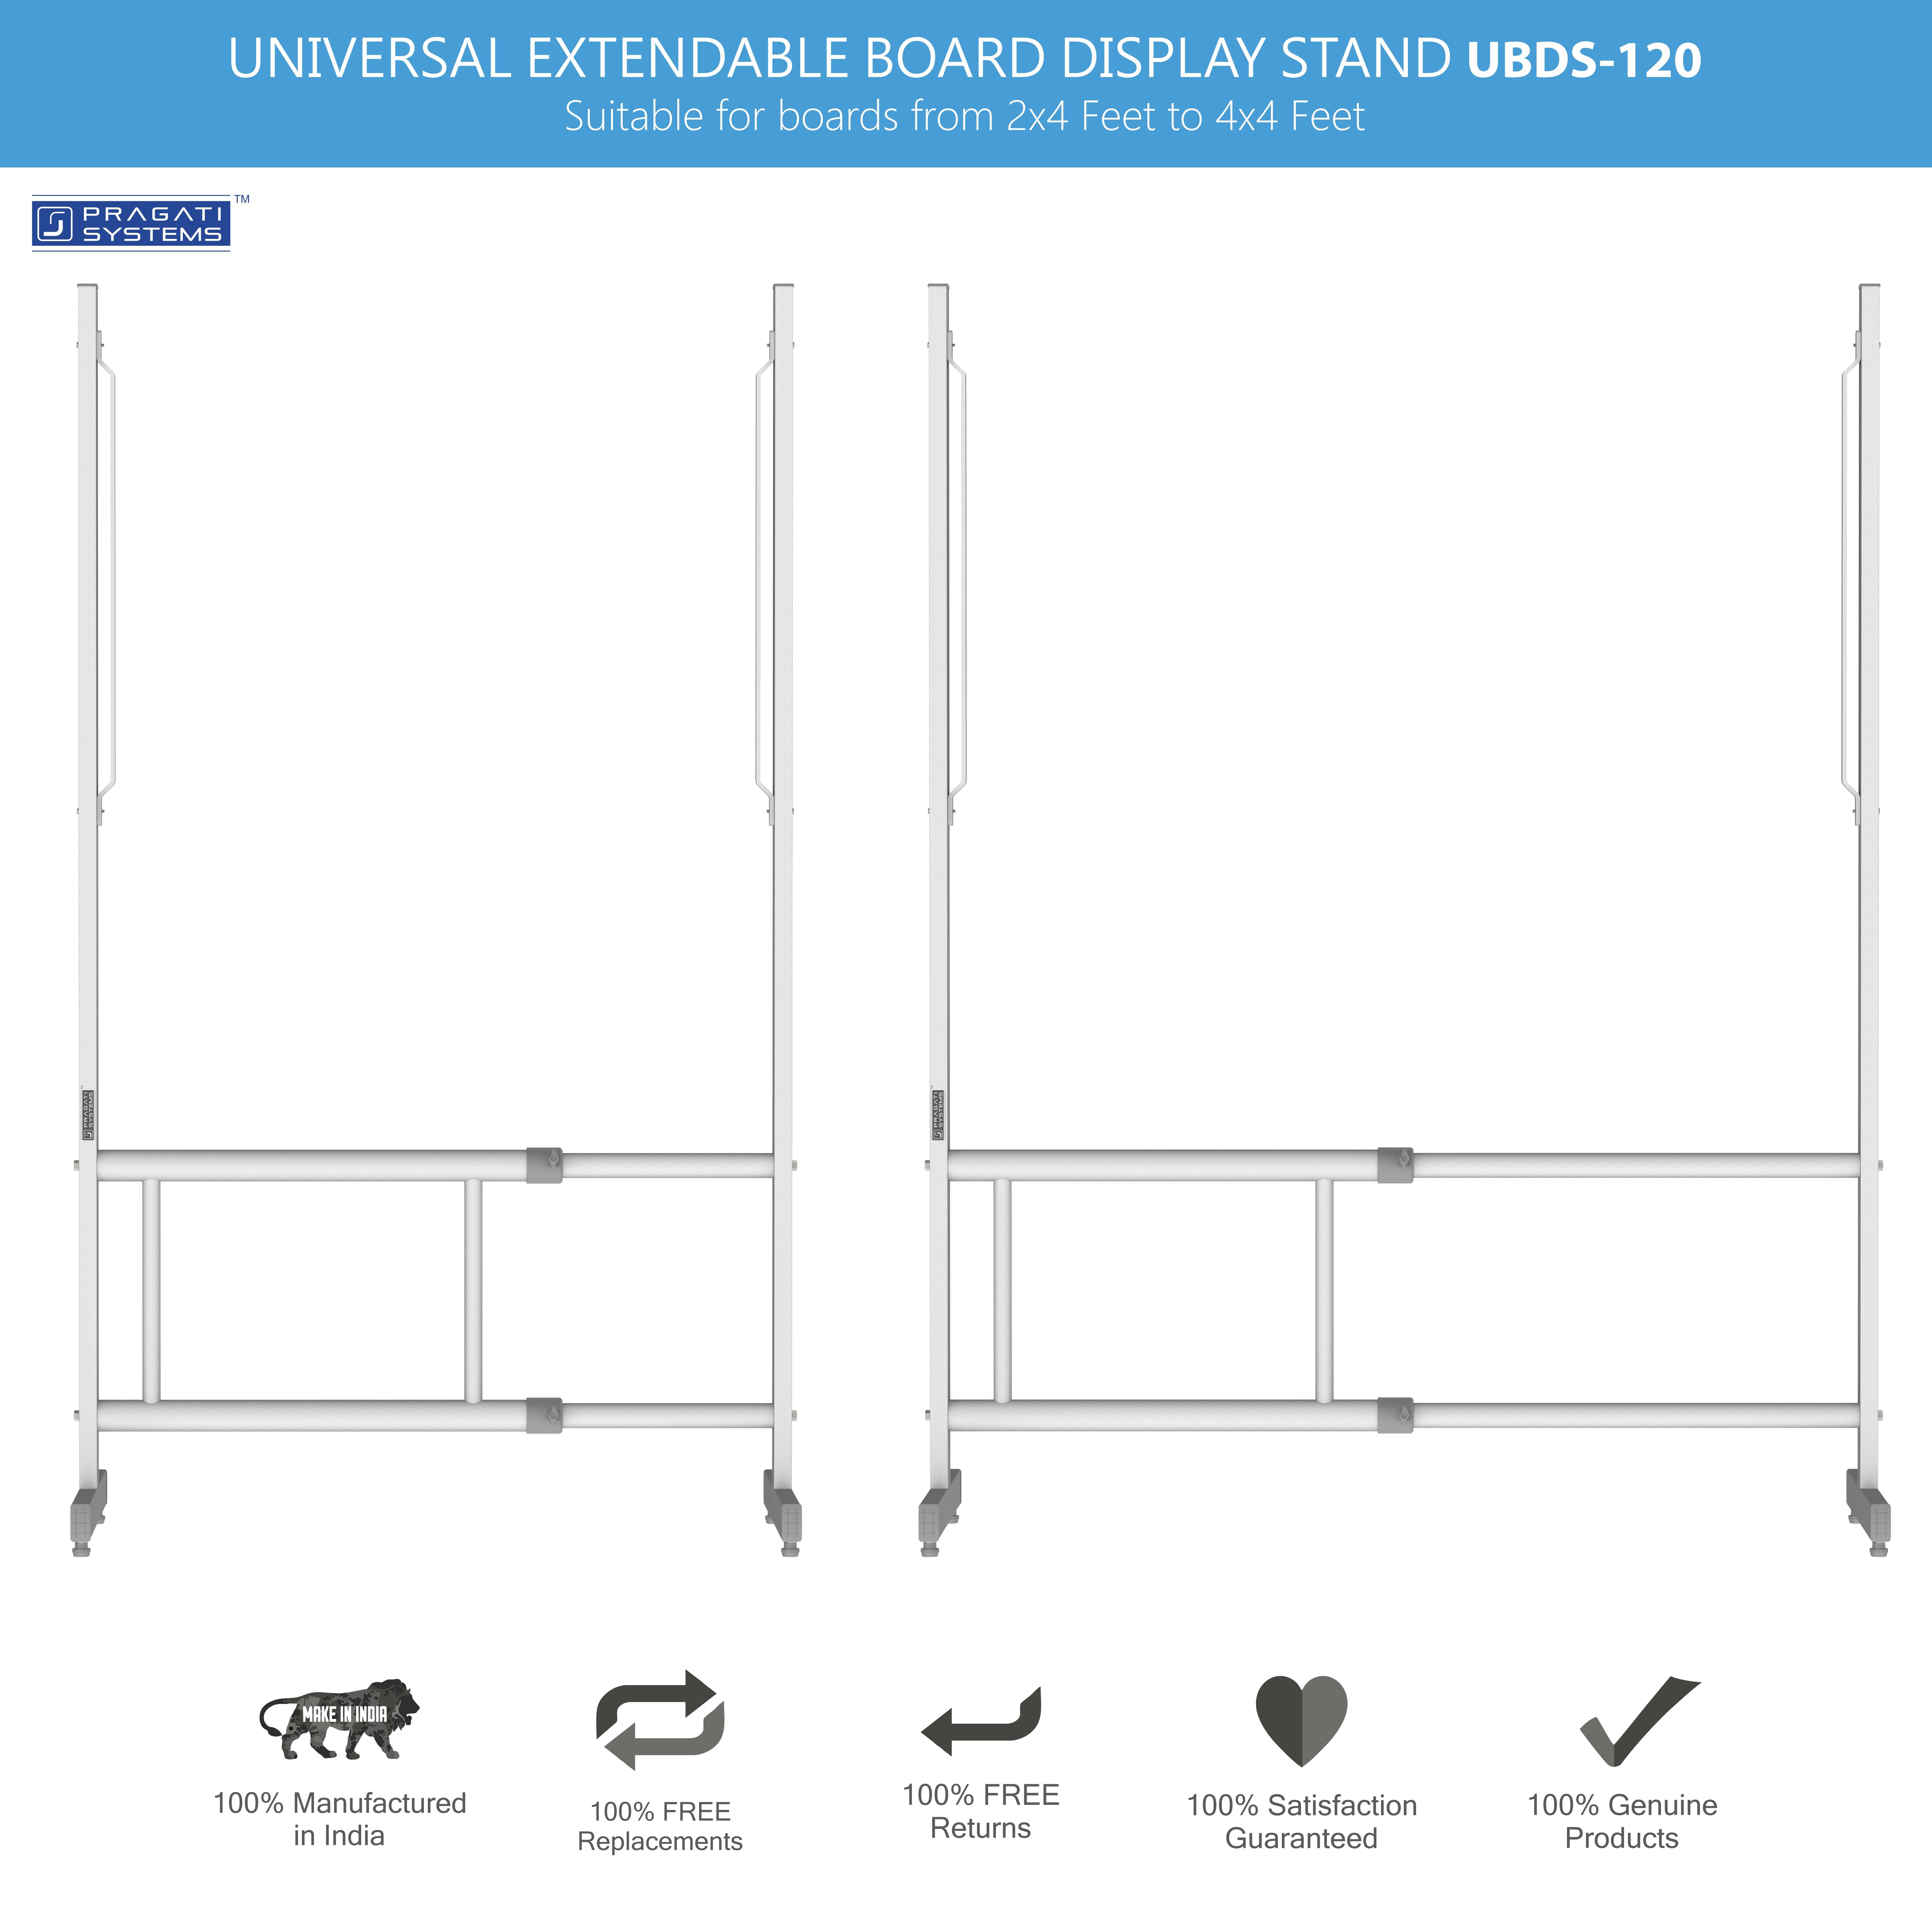 Portable Magnetic Whiteboard Presentation Stand Manufacturer, Supplier &  Exporter in India